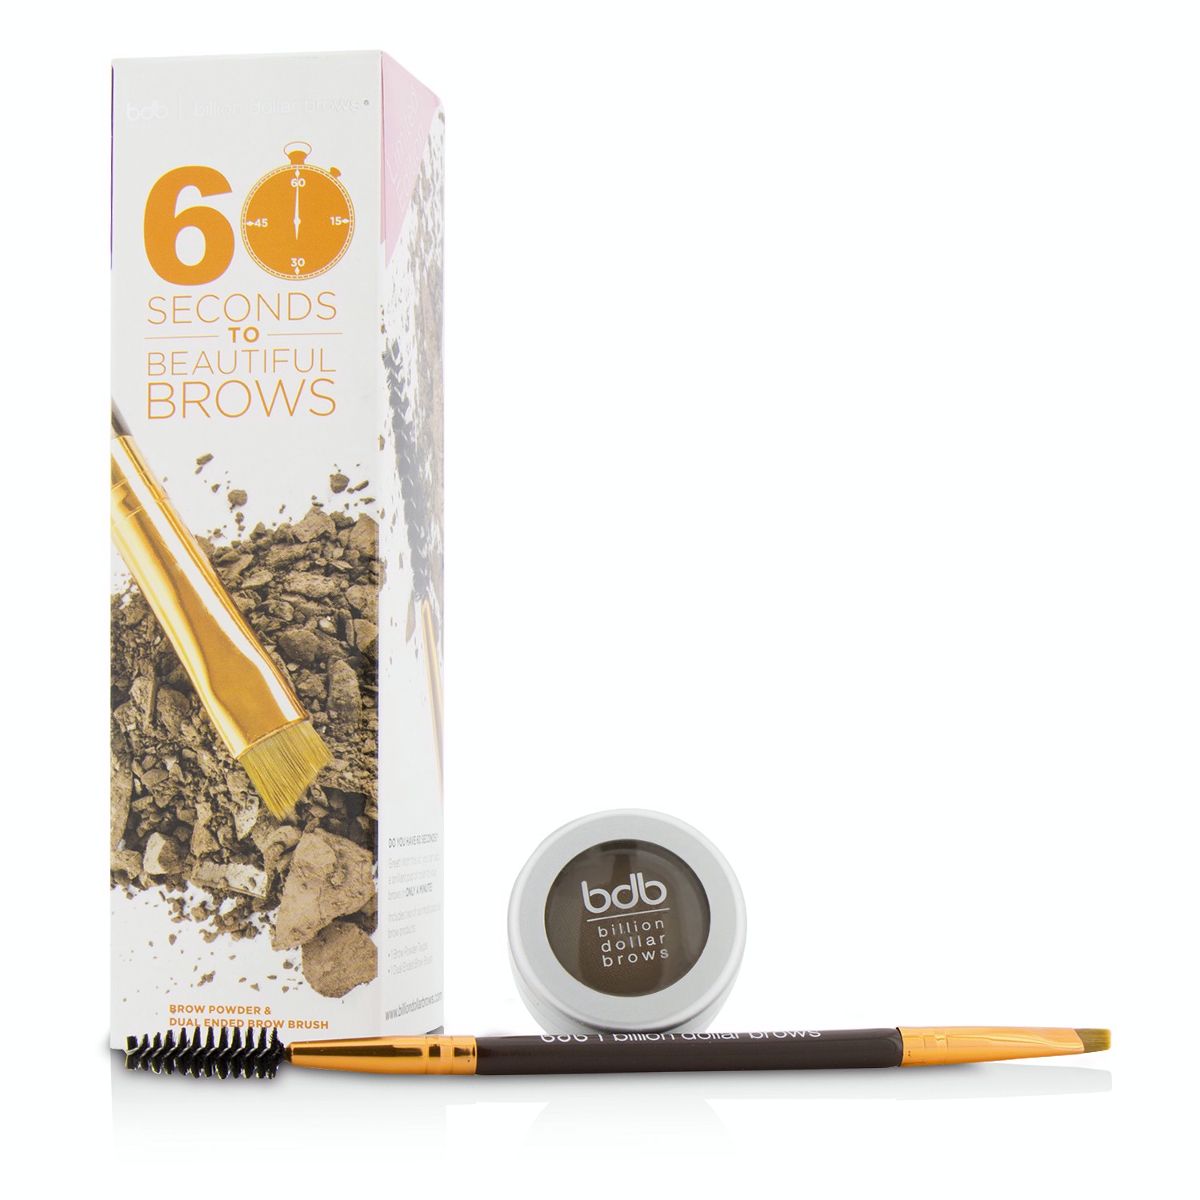 60 Seconds To Beautiful Brows Kit (1x Brow Powder 1x Dual Ended Brow Brush) - Taupe Billion Dollar Brows Image